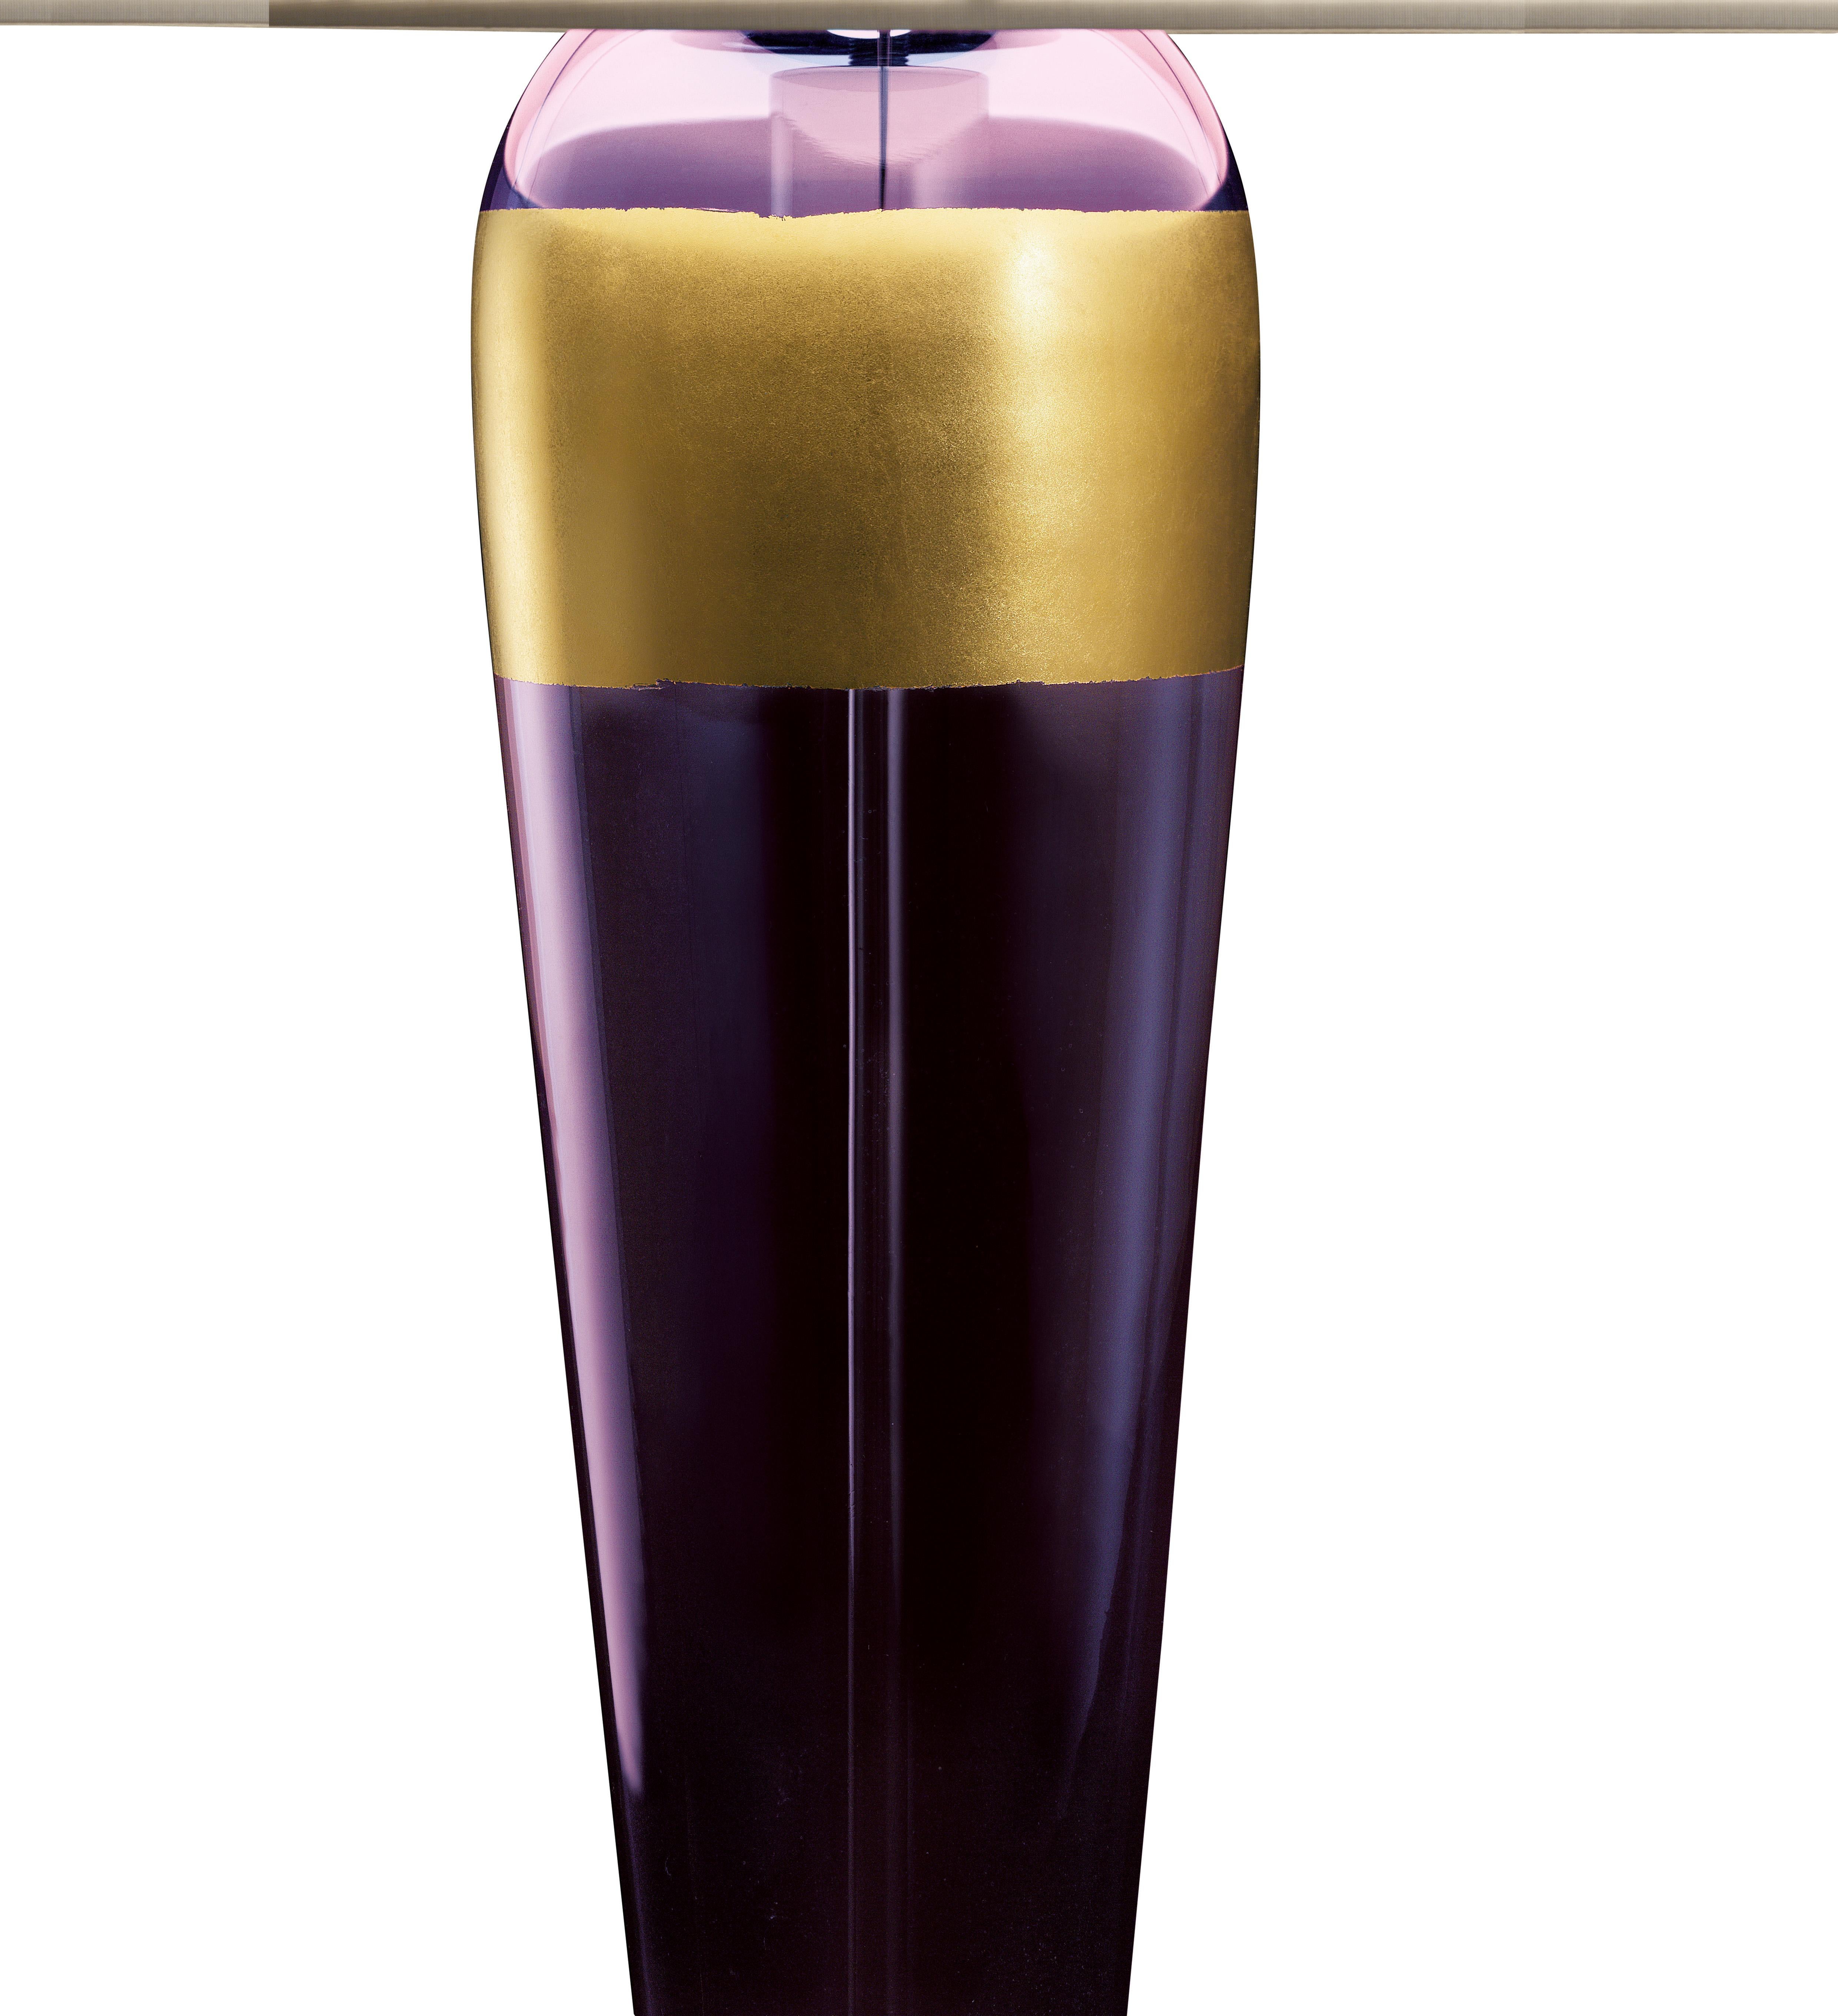 Purple (Violet_VI) Sara 5574 Table Lamp in Glass with Black Shade, by Barovier&Toso